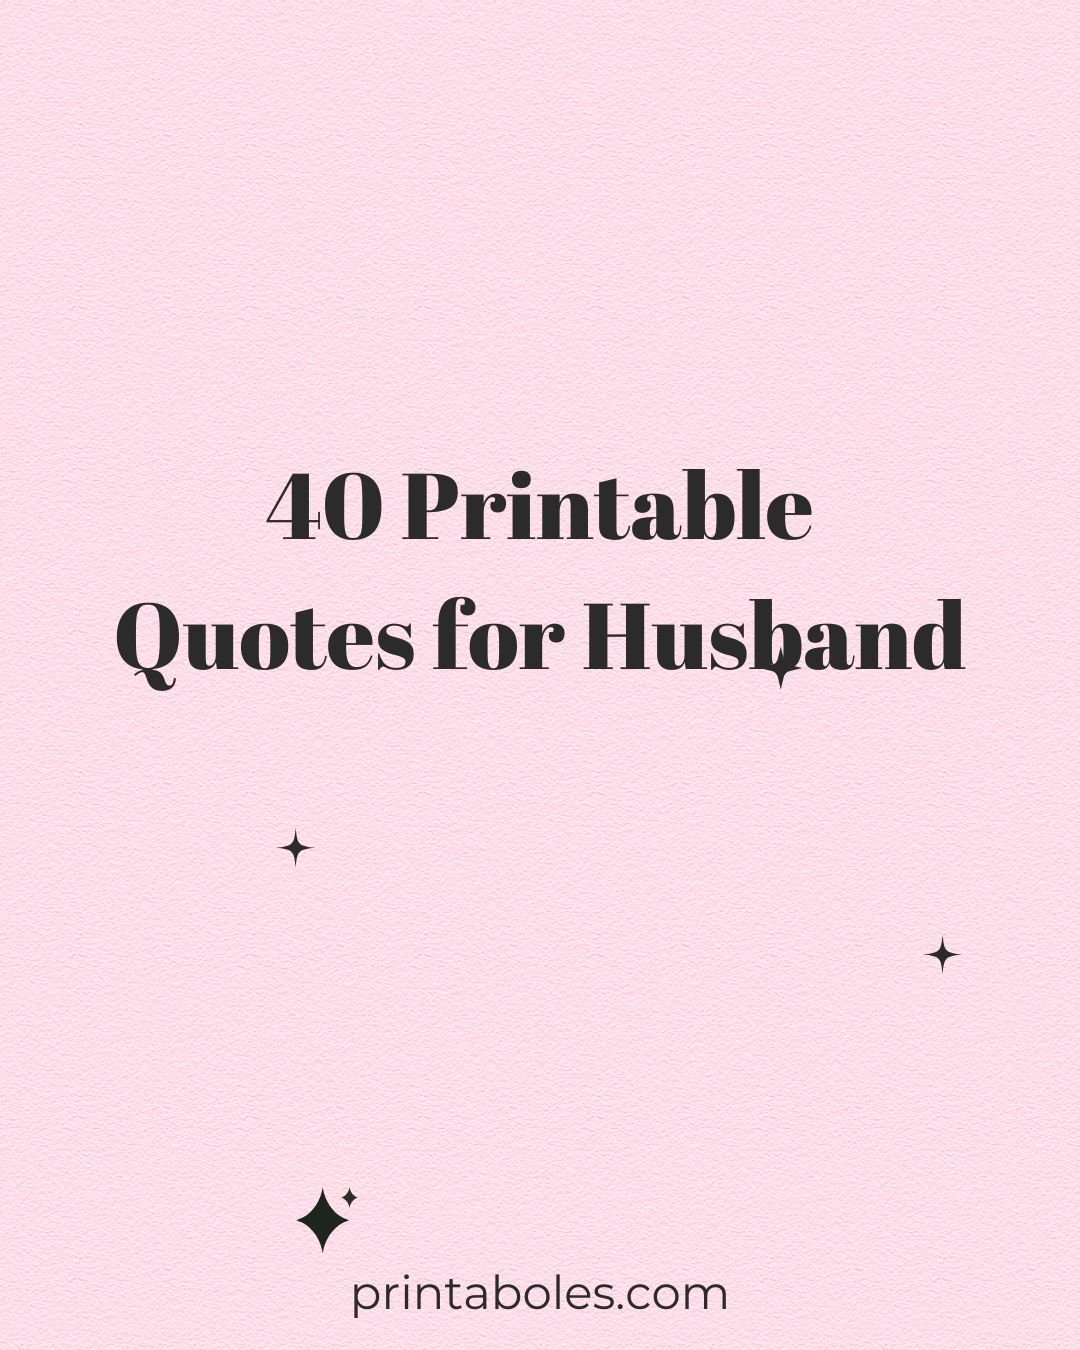 40 Printable Quotes for Husband